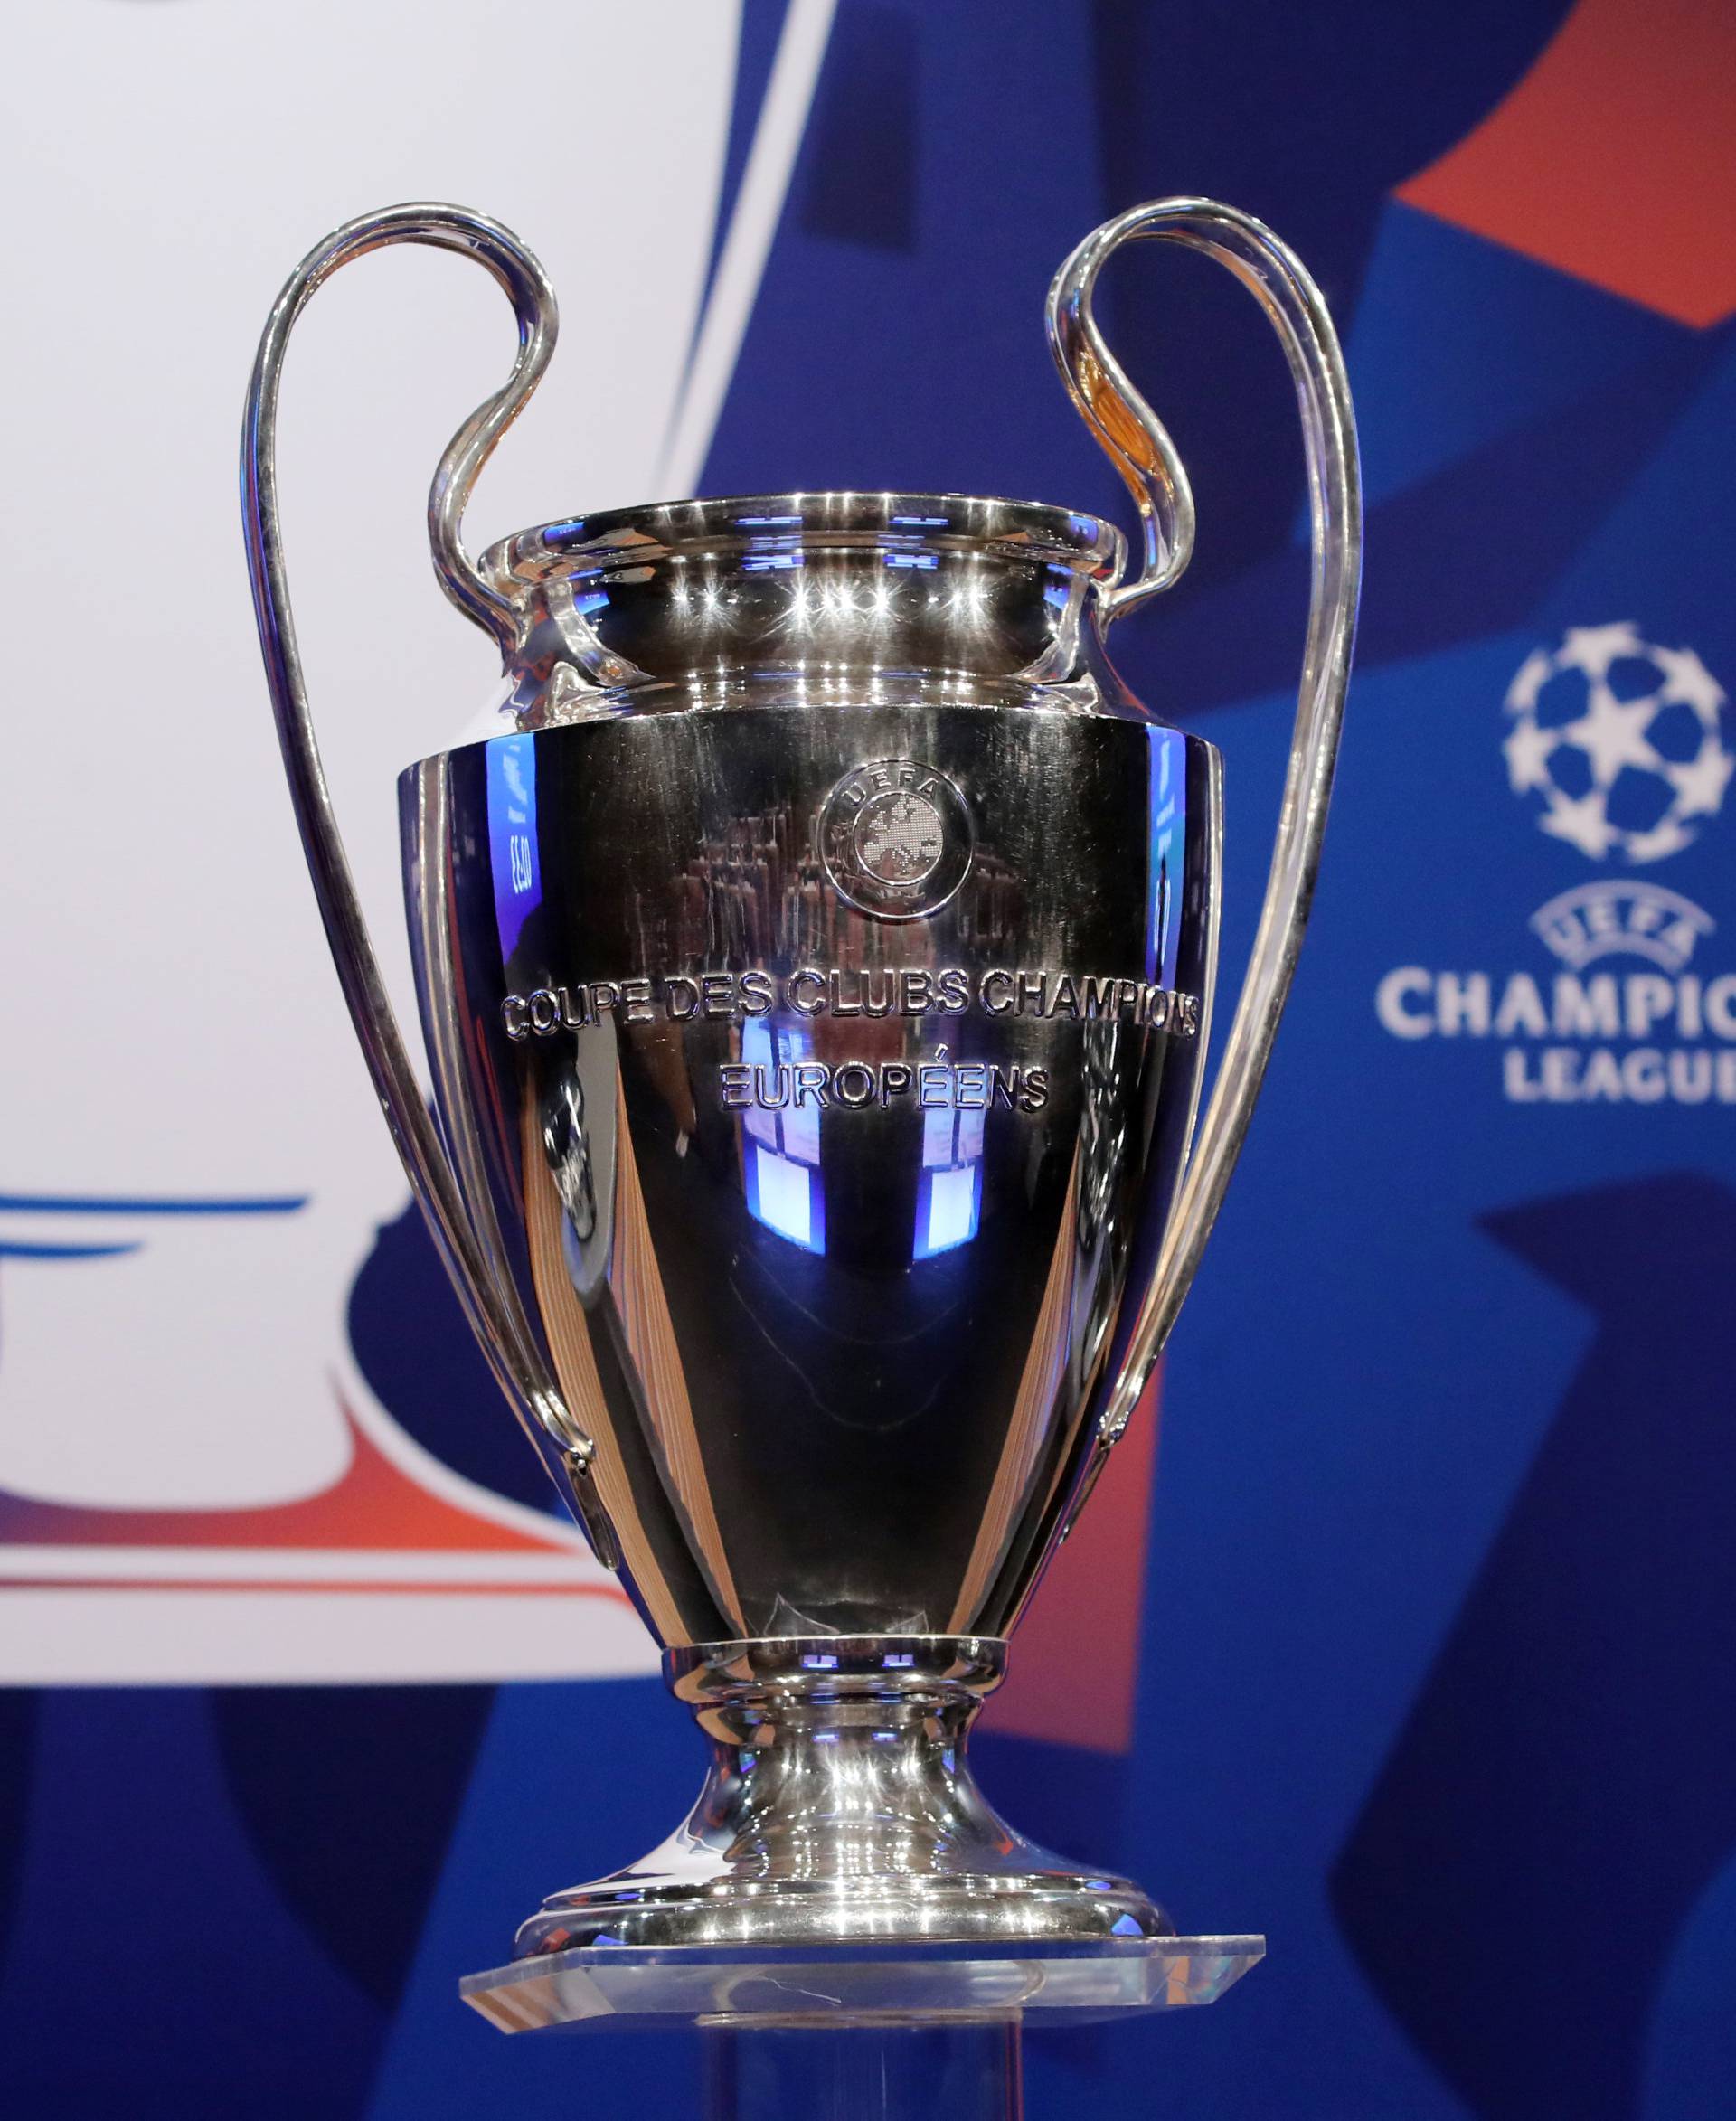 Champions League - Round of 16 Draw